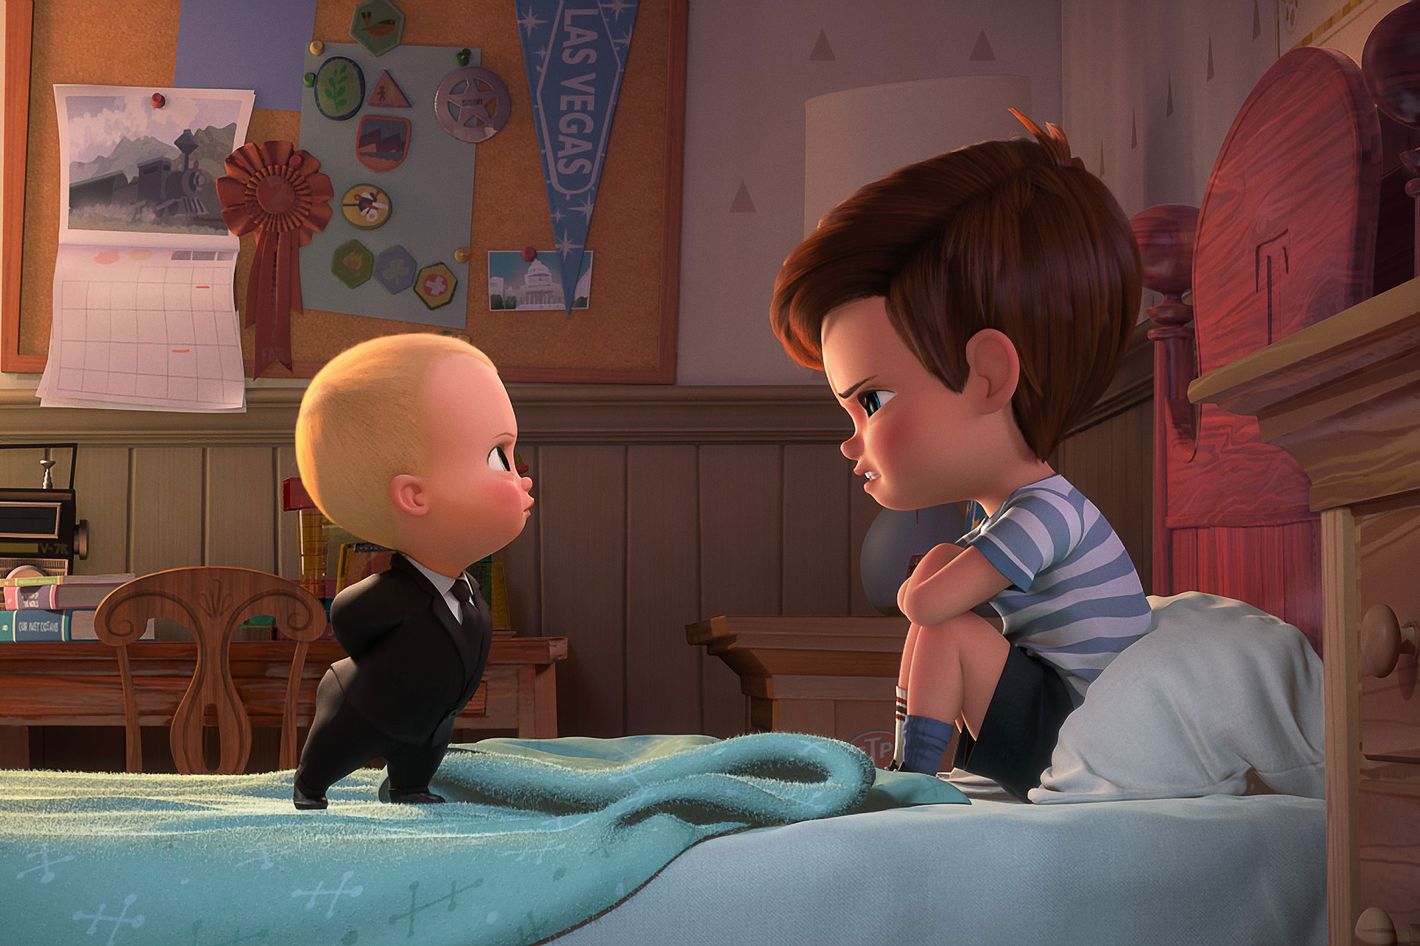 Boss Baby' Movie Review: The Only Trump Metaphor We Need